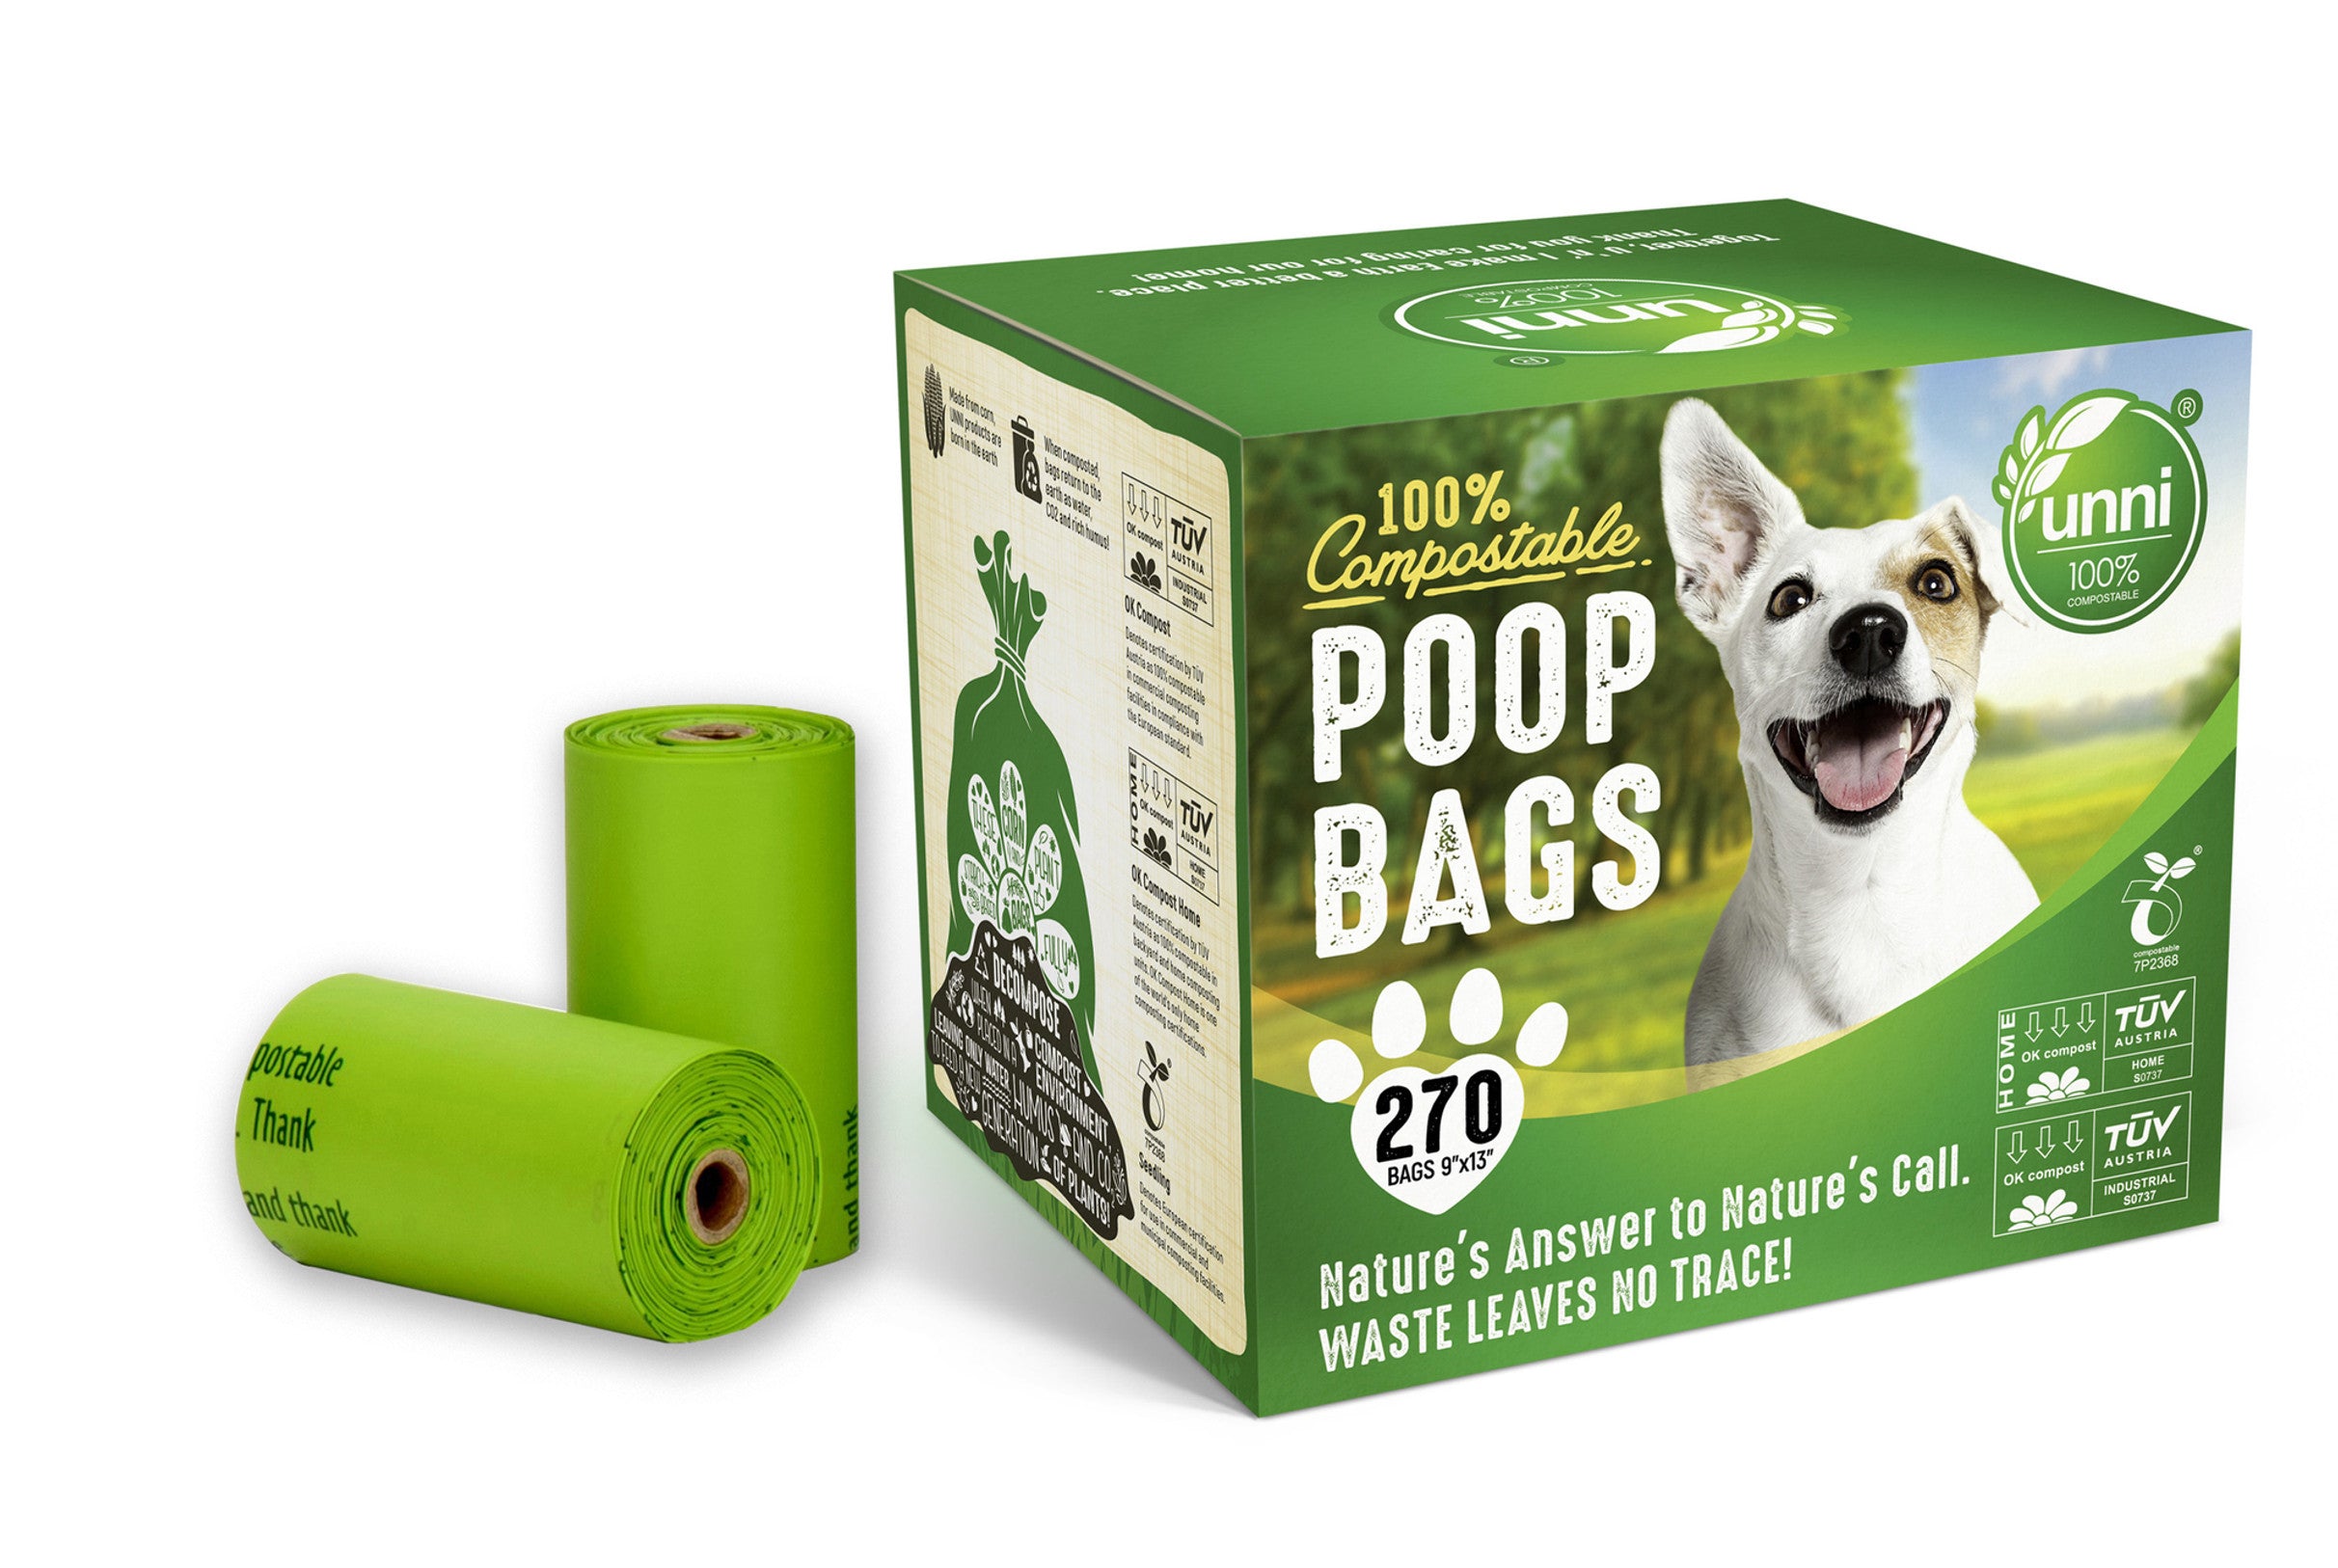 Biodegradable Dog Poop Bags Might Be Too Good To Be True | Discover Magazine